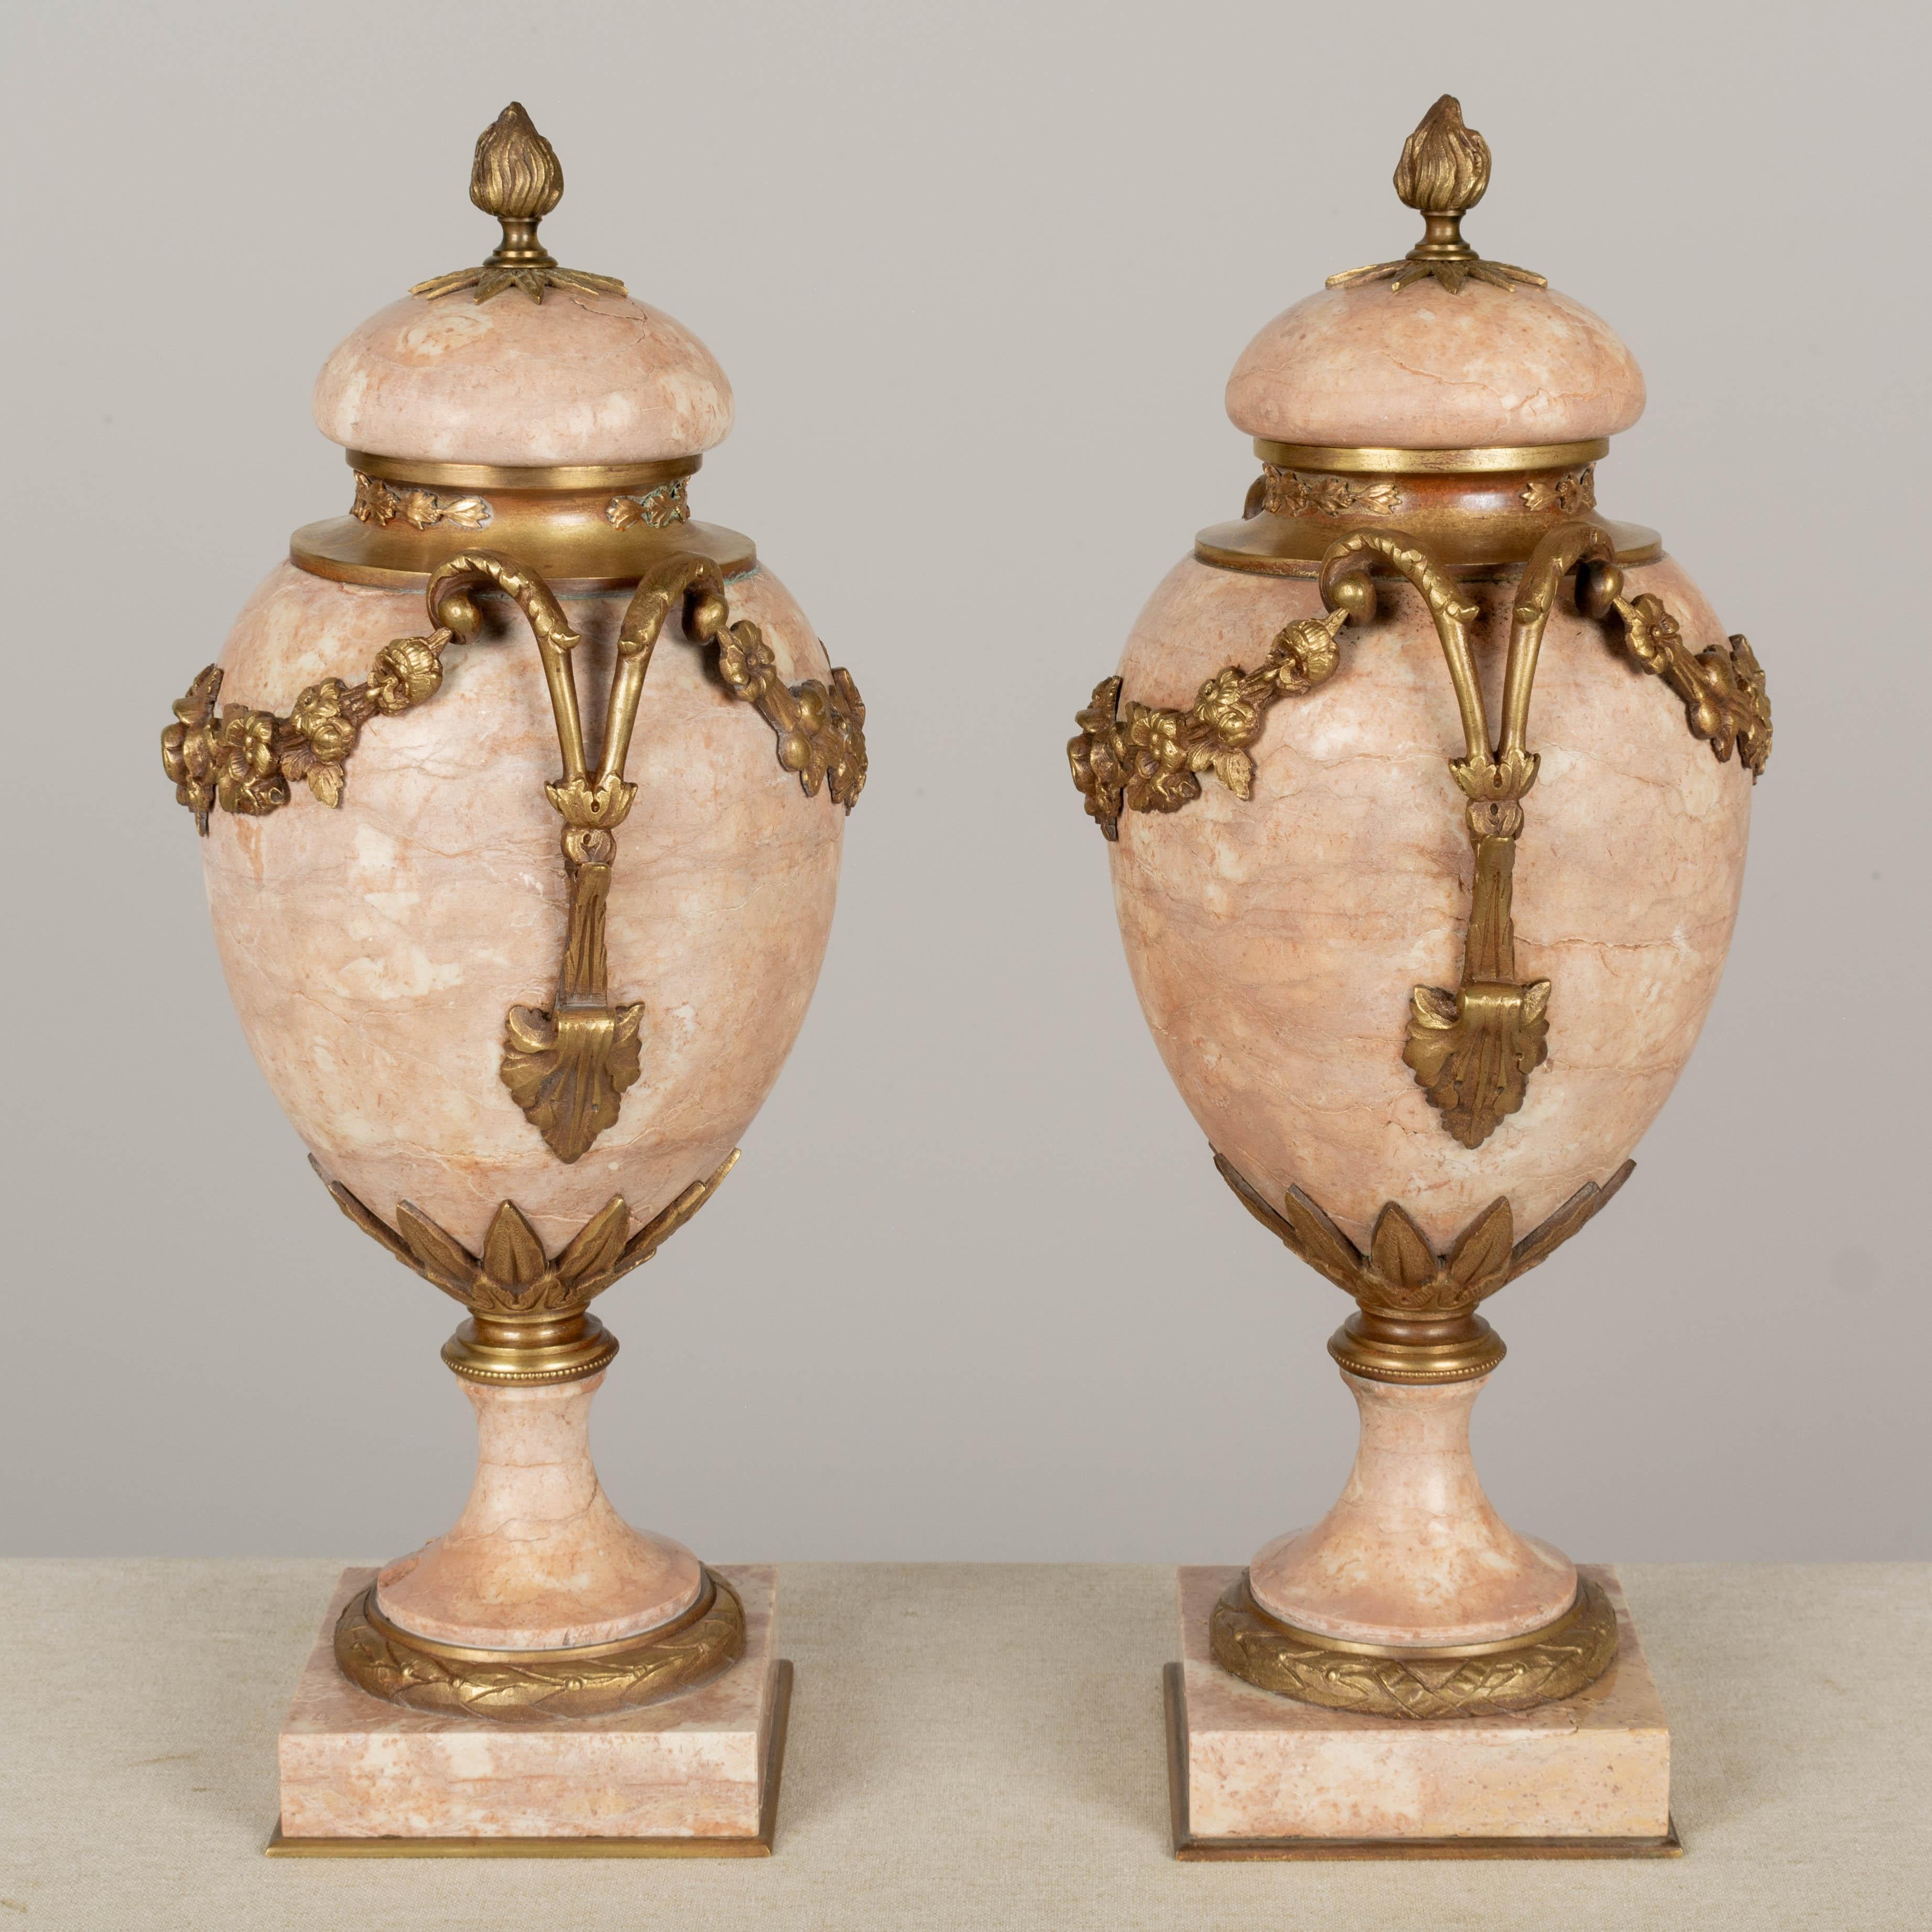 A pair of 19th century French bronze mounted urn form cassolettes with beautiful rose colored marble and nicely detailed cast floral garlands. Removable lids with flame finials. Small chip to the base of one pedestal. circa 1880-1900. 
Dimensions: